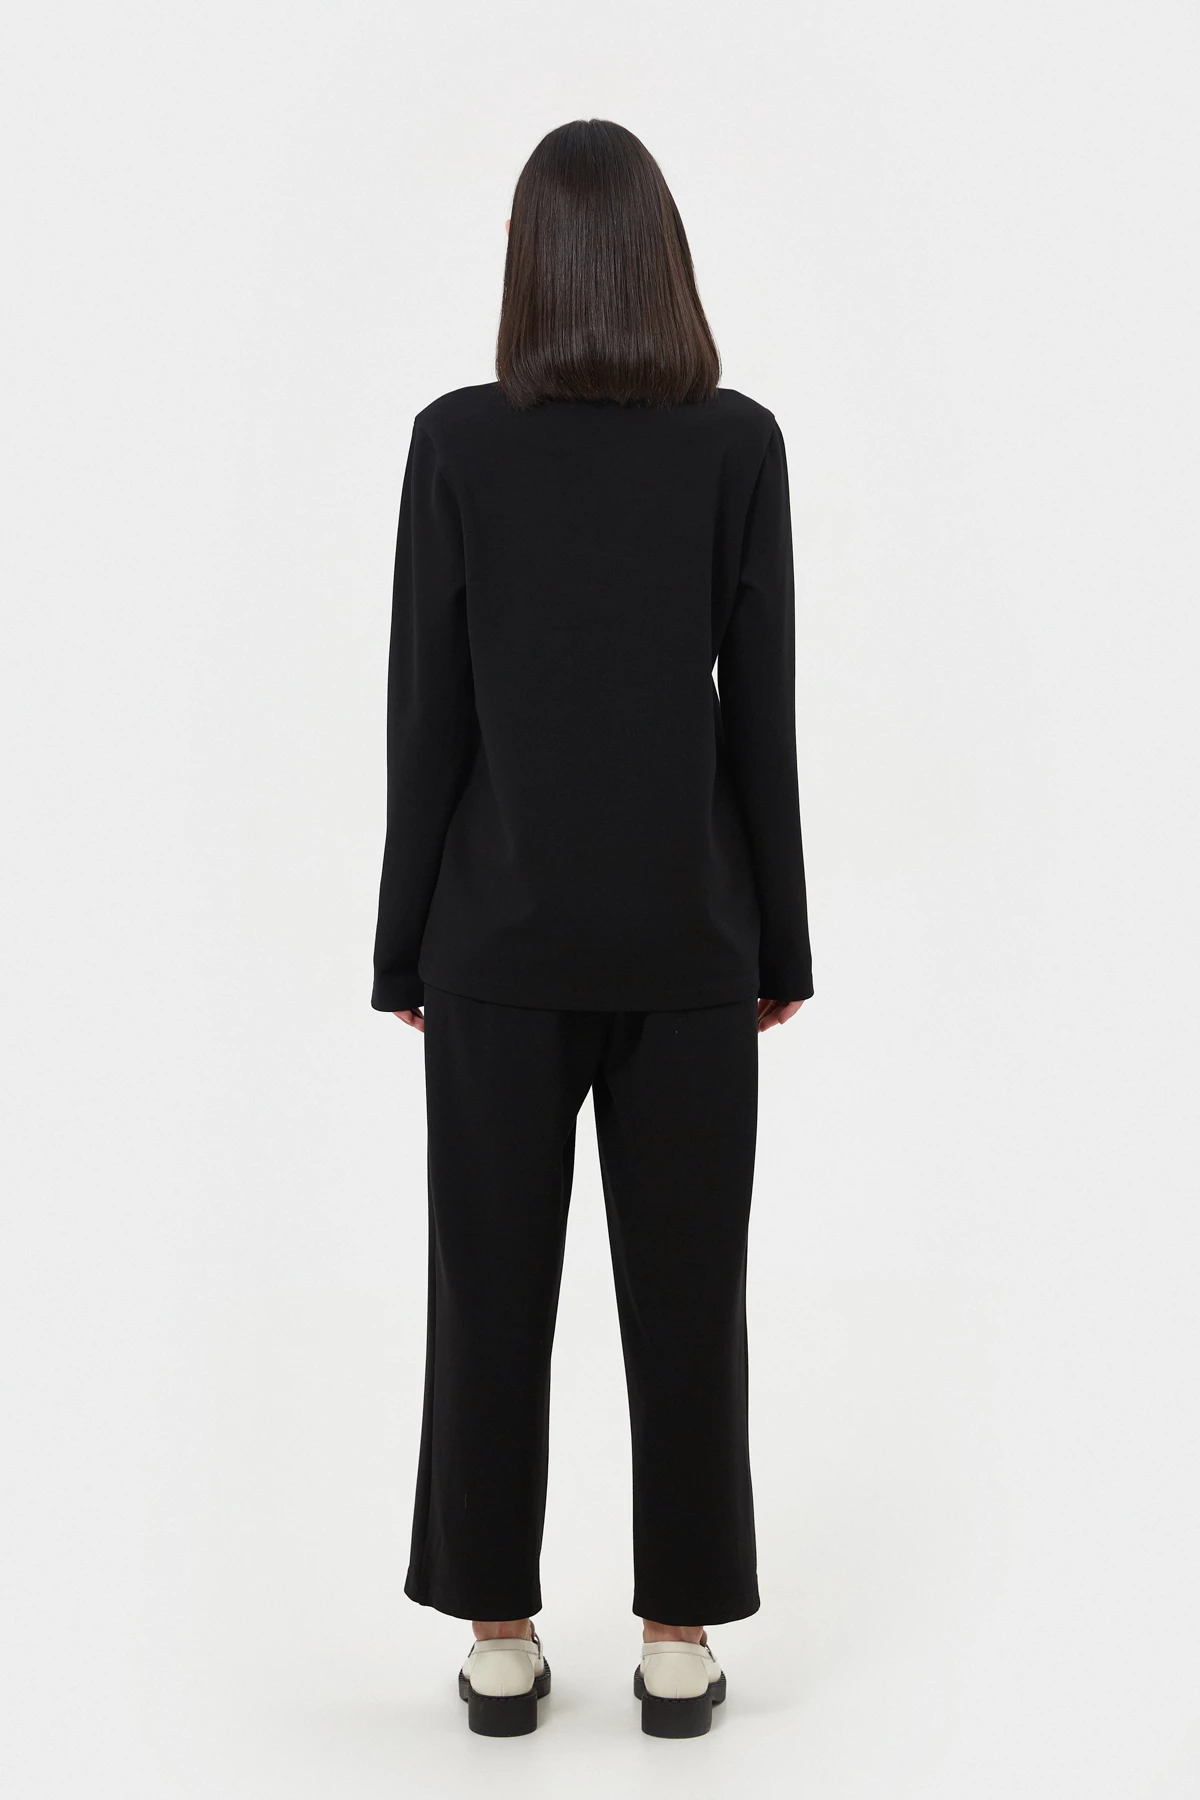 Black jersey loose-fit cropped pants, photo 3